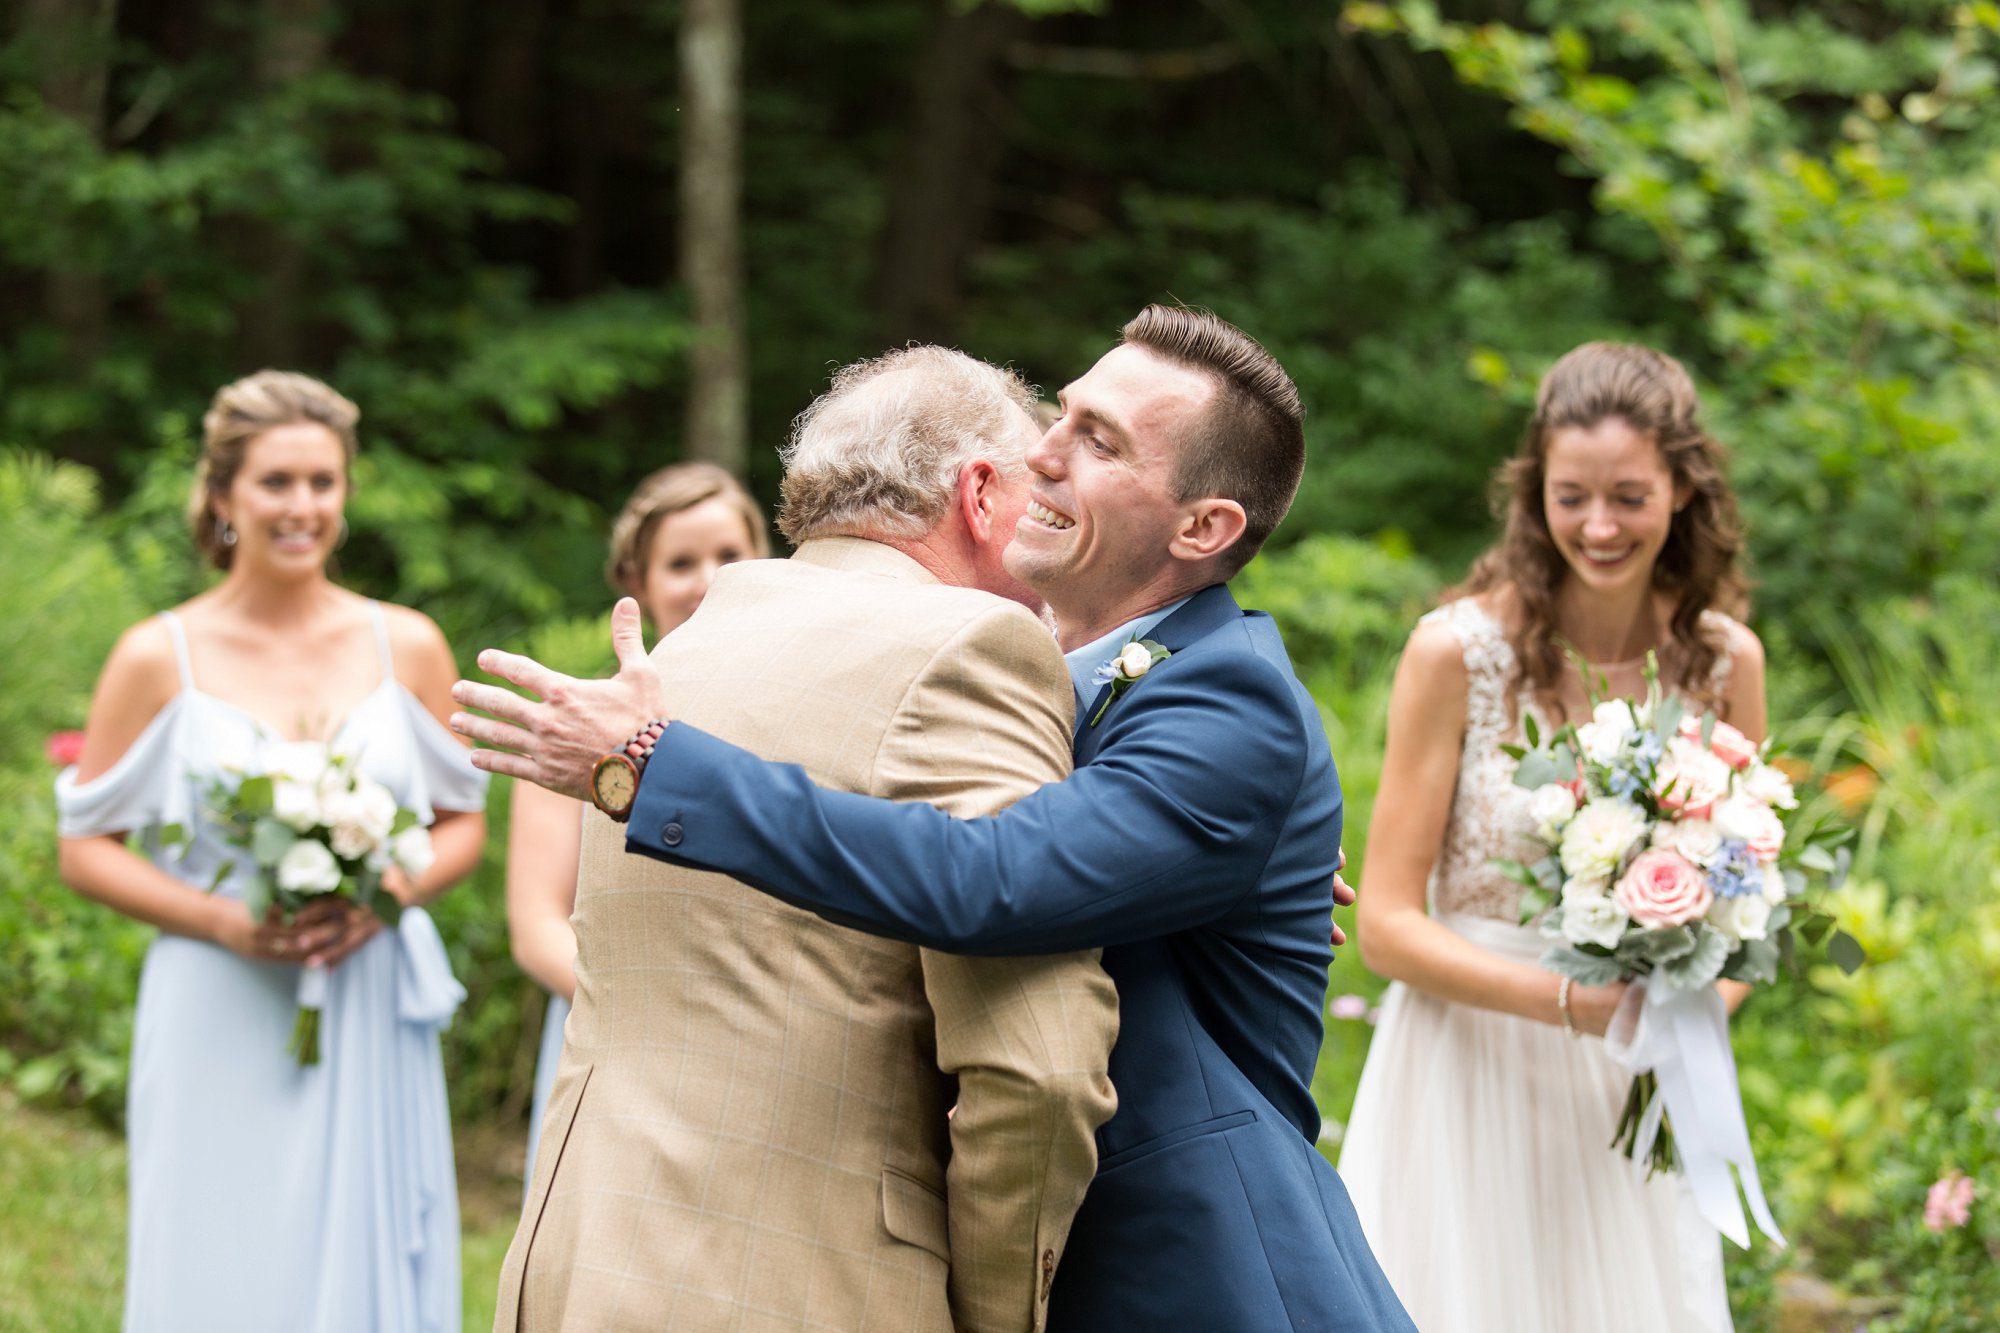 Summer wedding at family home in New Hampshire